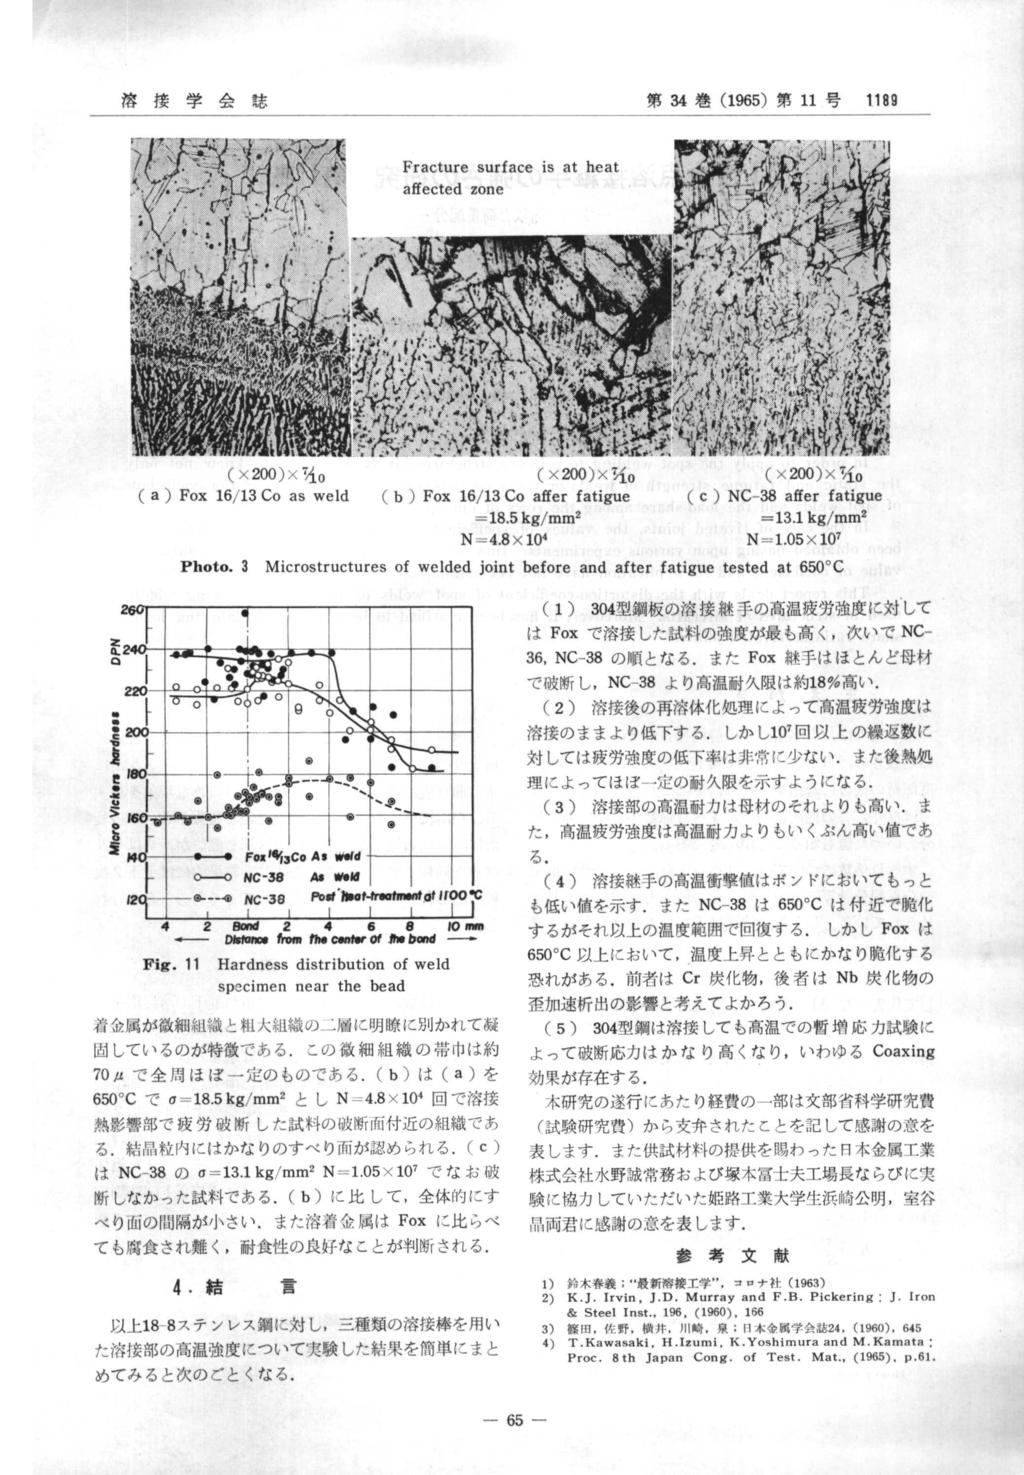 溶 接 学 Photo. 会 誌 3 第34巻(1965)第11号 Microstructures welded joint before and after (1)304型 はFoxで figue tested 650 Ž 鋼板 の溶 接 継 手 の 高 温 疲 労 強度 に対.して 溶接 した試 料 の 強 度 が最 も高 く,次 い でNC- 36,NC-38の 順 とな る.